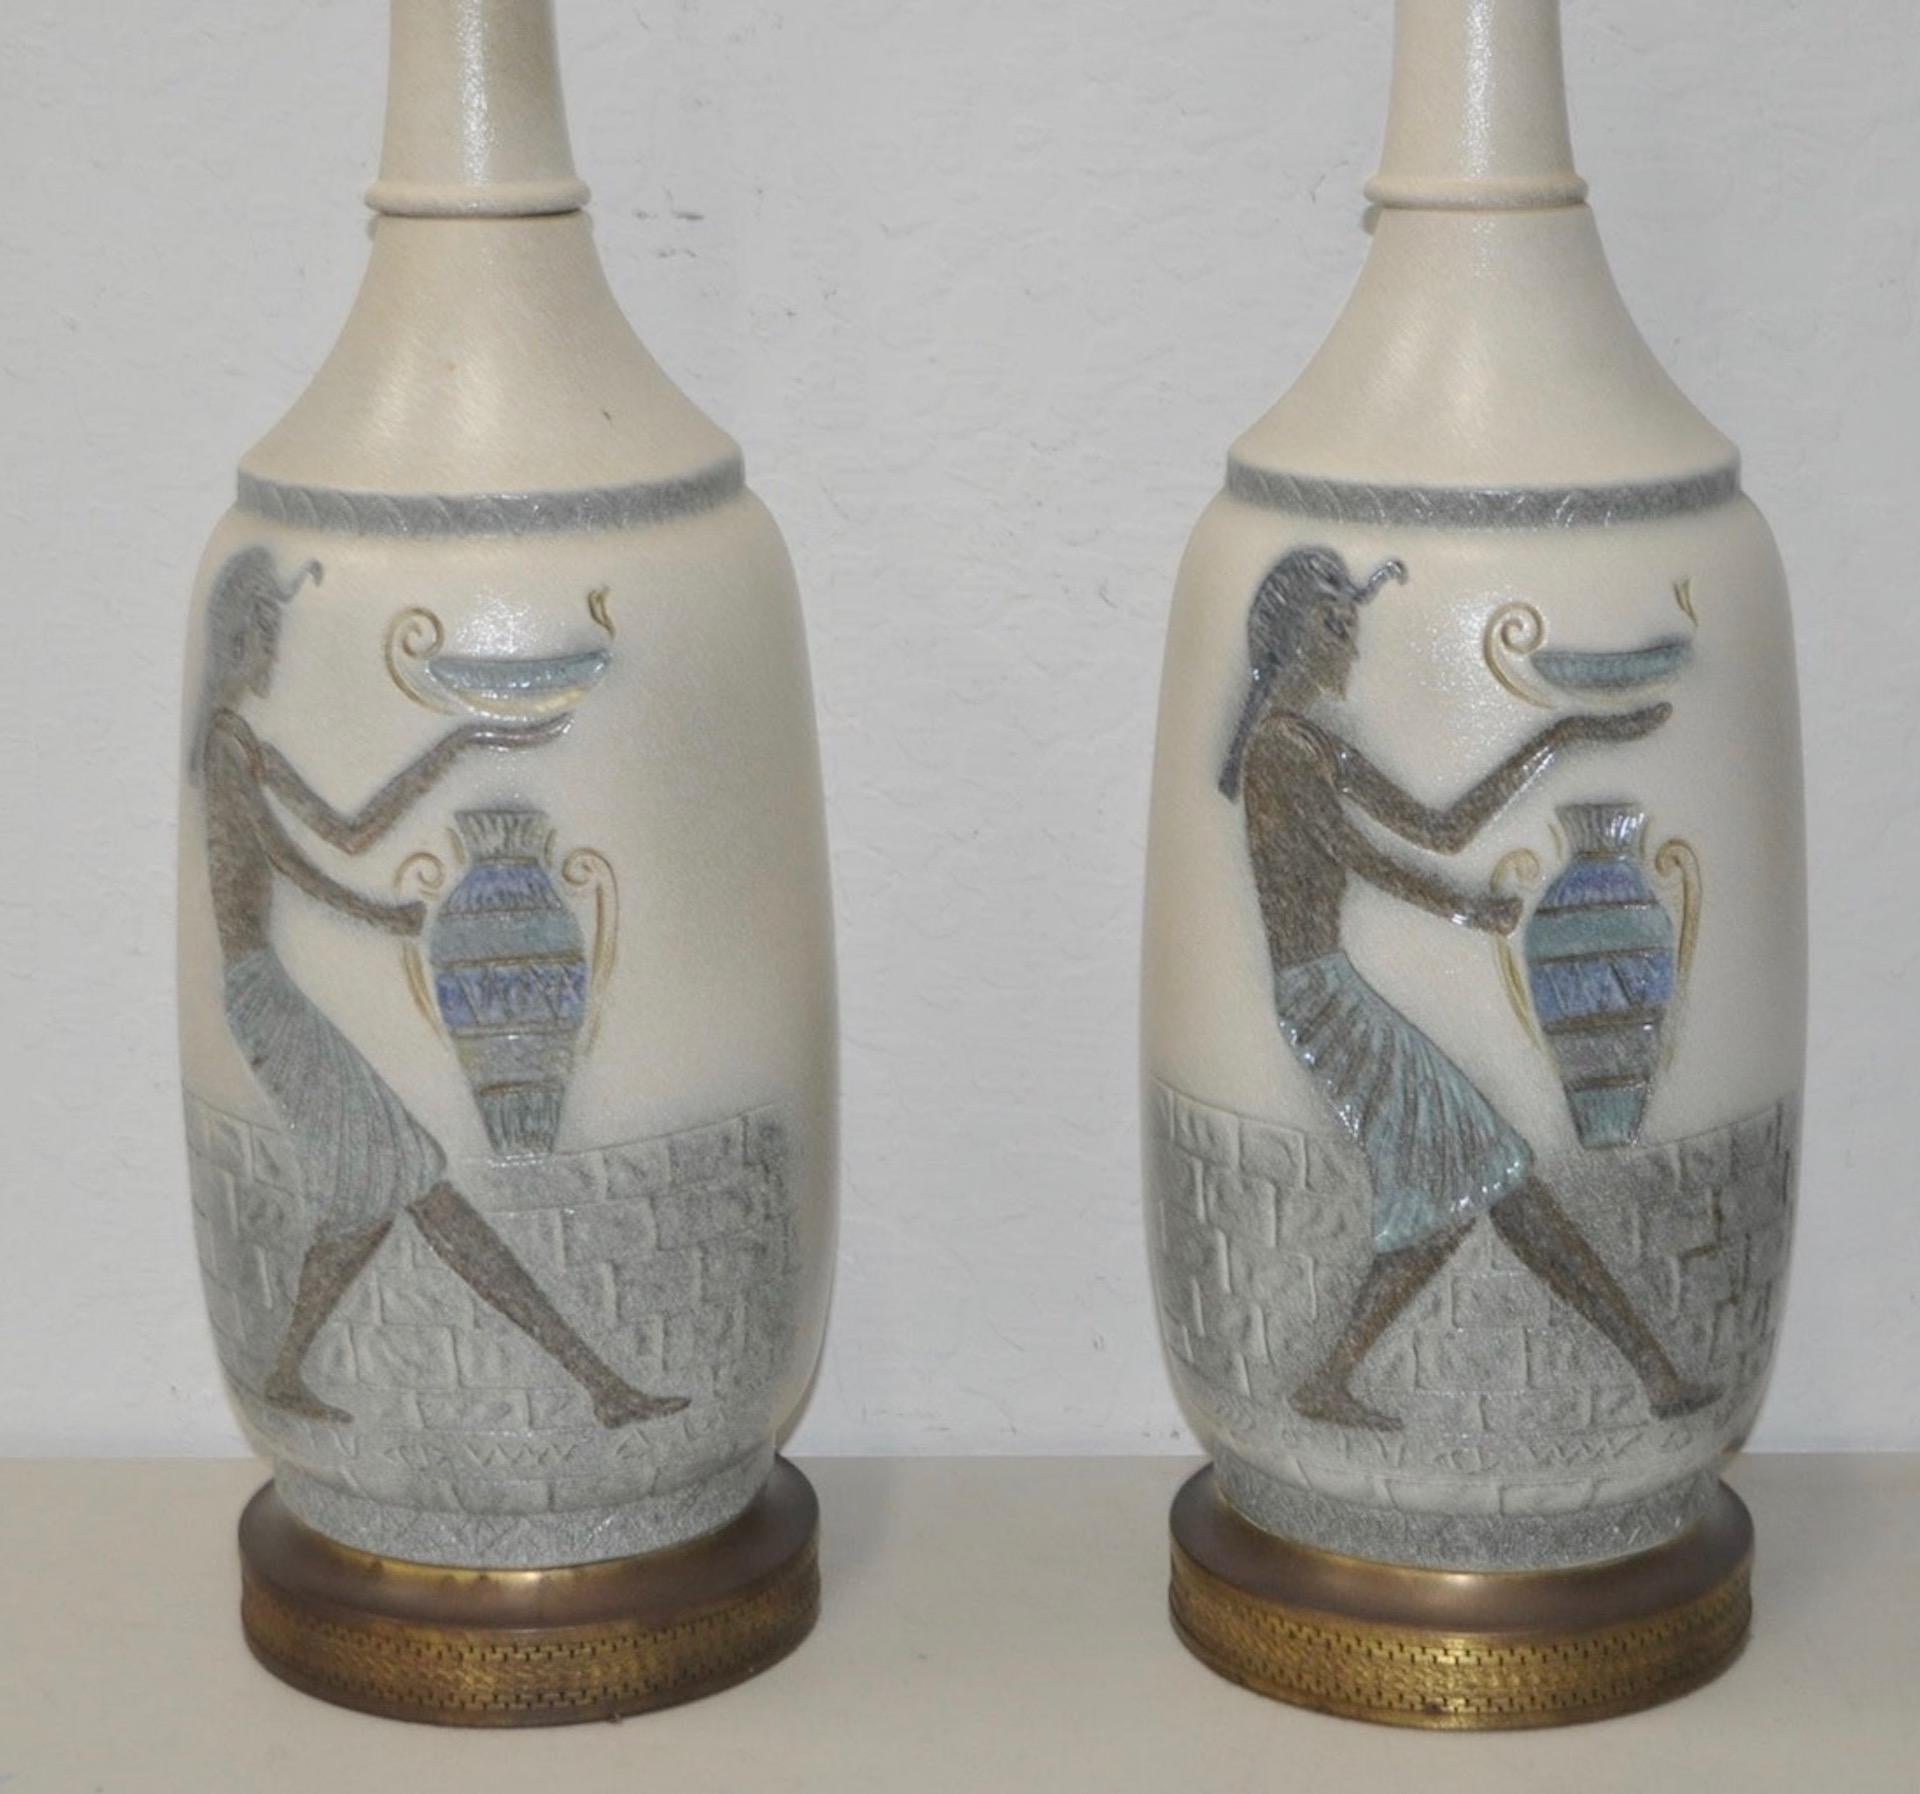 Pair of vintage Egyptian Revival ceramic table lamps, circa 1960s

Walk like an Egyptian with these fantastic vintage table lamps.

This matching pair will look great in any contemporary interior.

Dimensions: 7 1/2